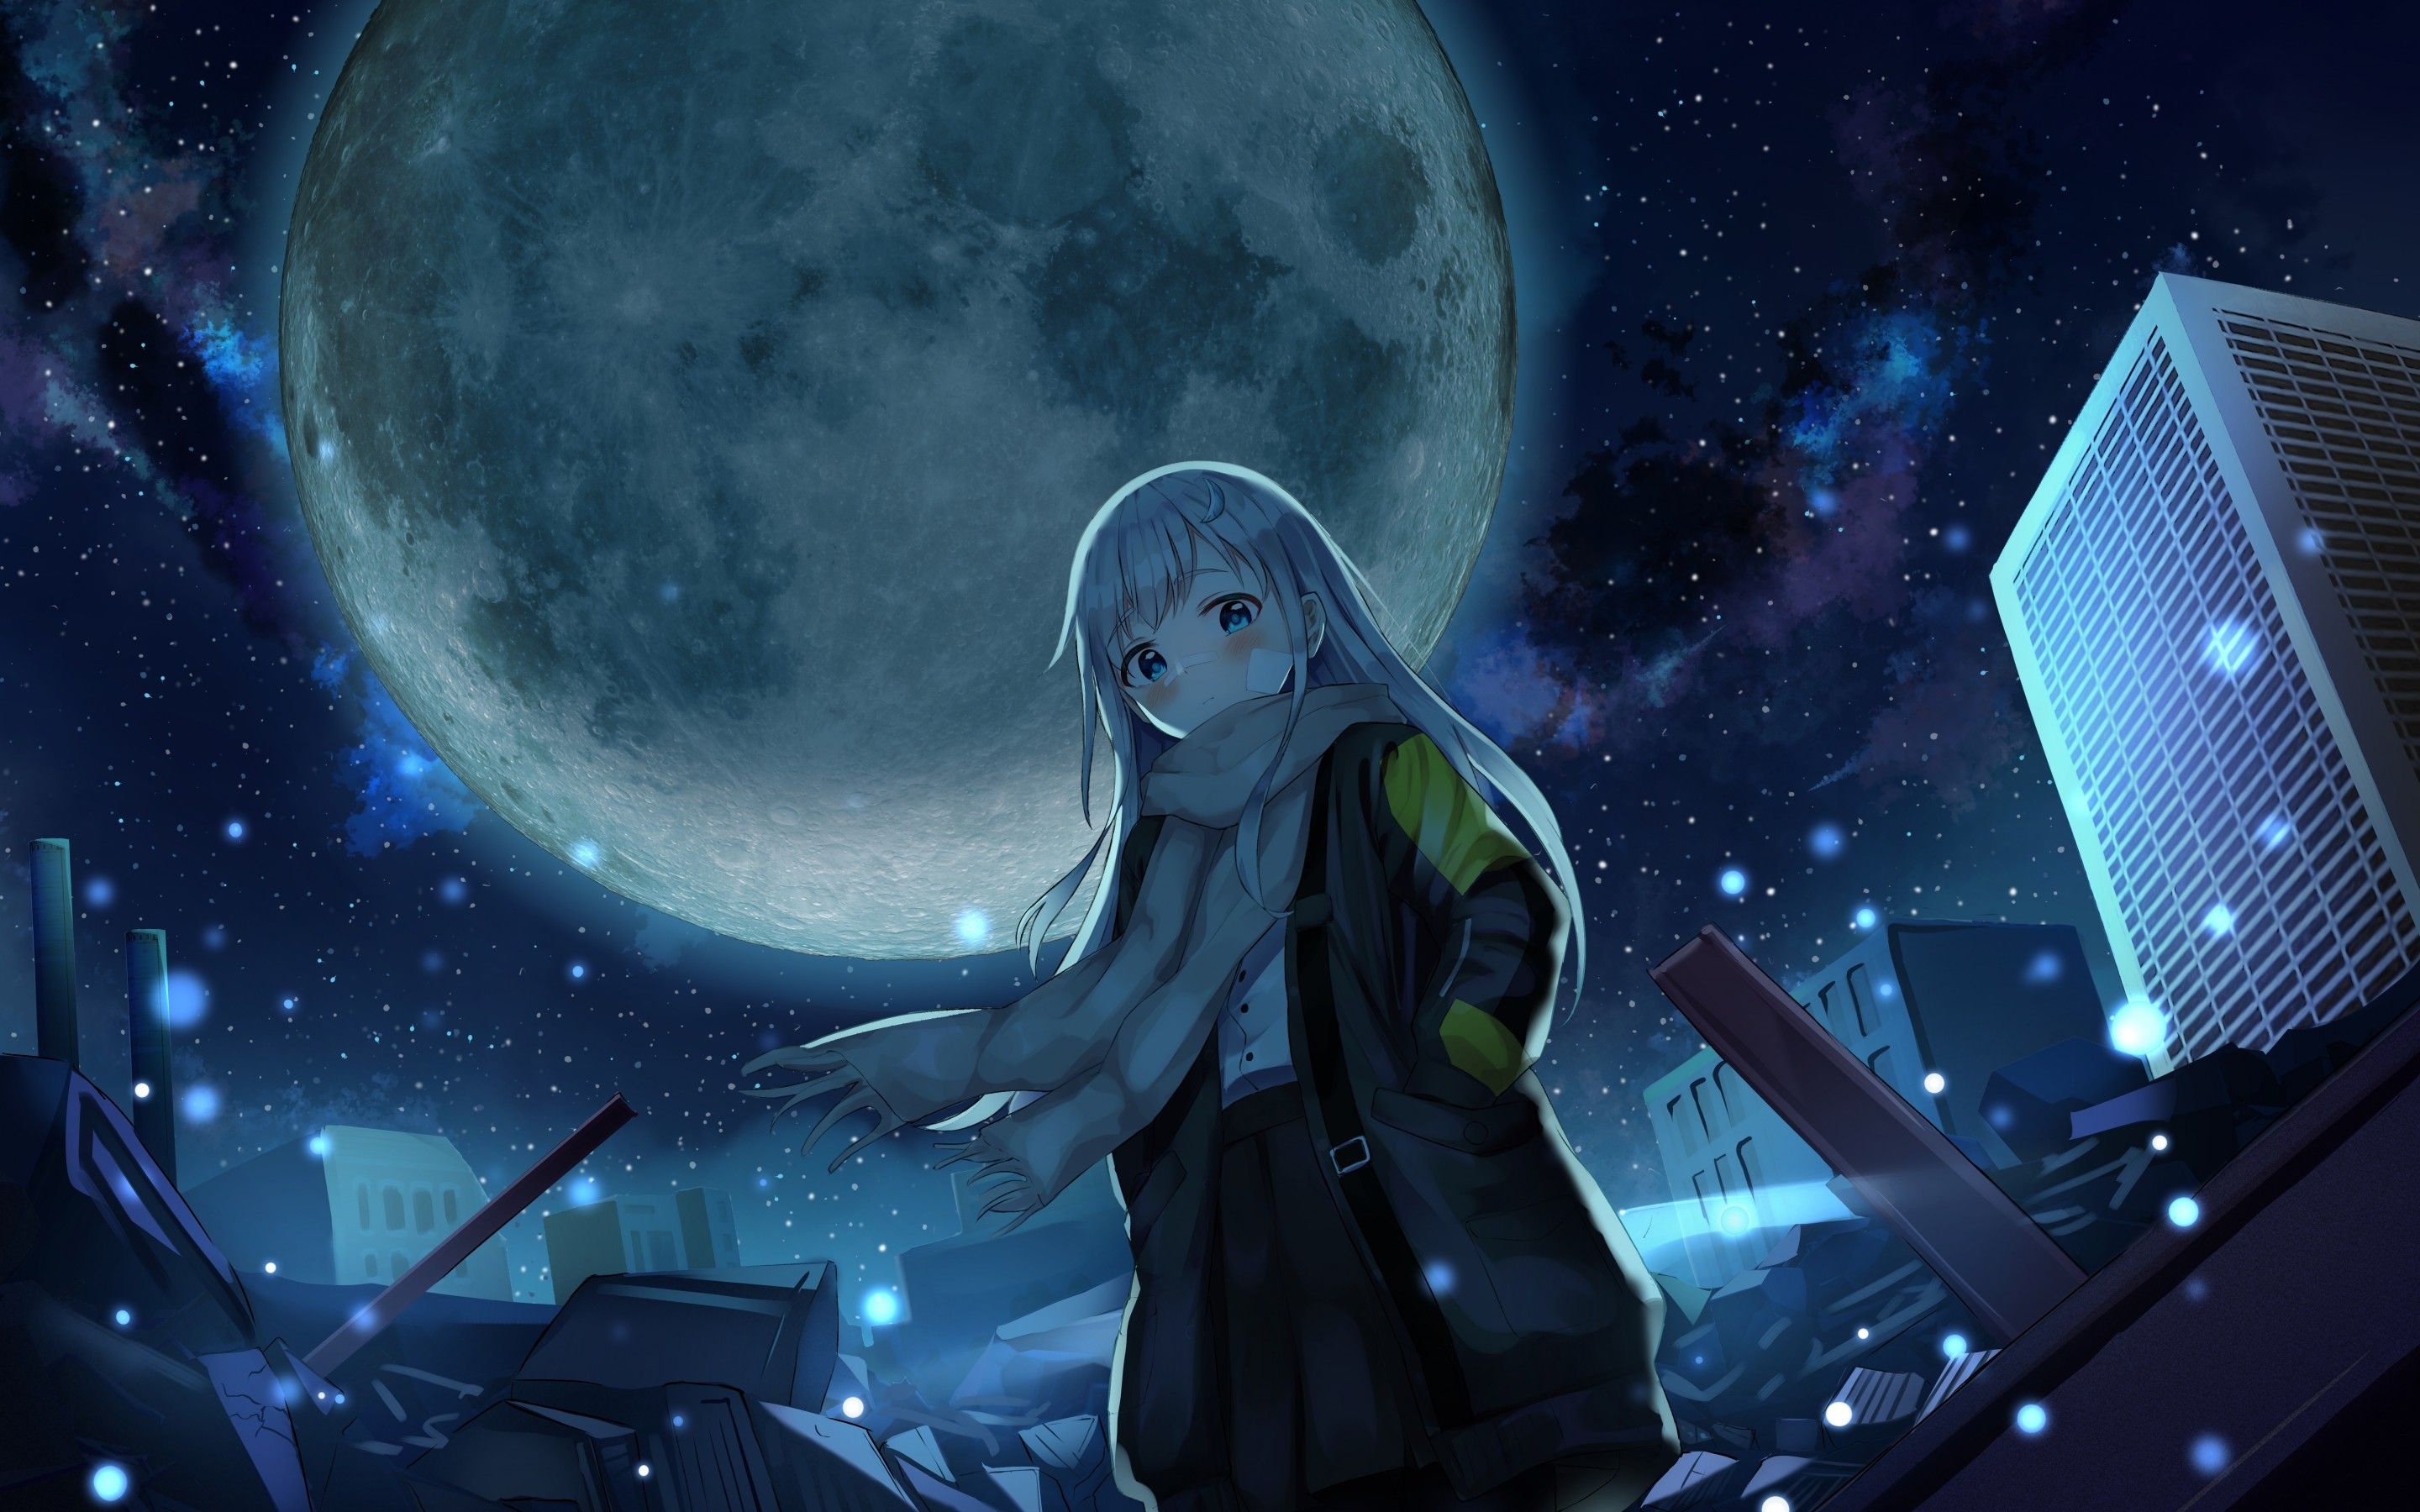 Download 2880x1800 Anime Night, Giant Moon, Starry Sky, Anime Girl, Winter Wallpaper for MacBook Pro 15 inch